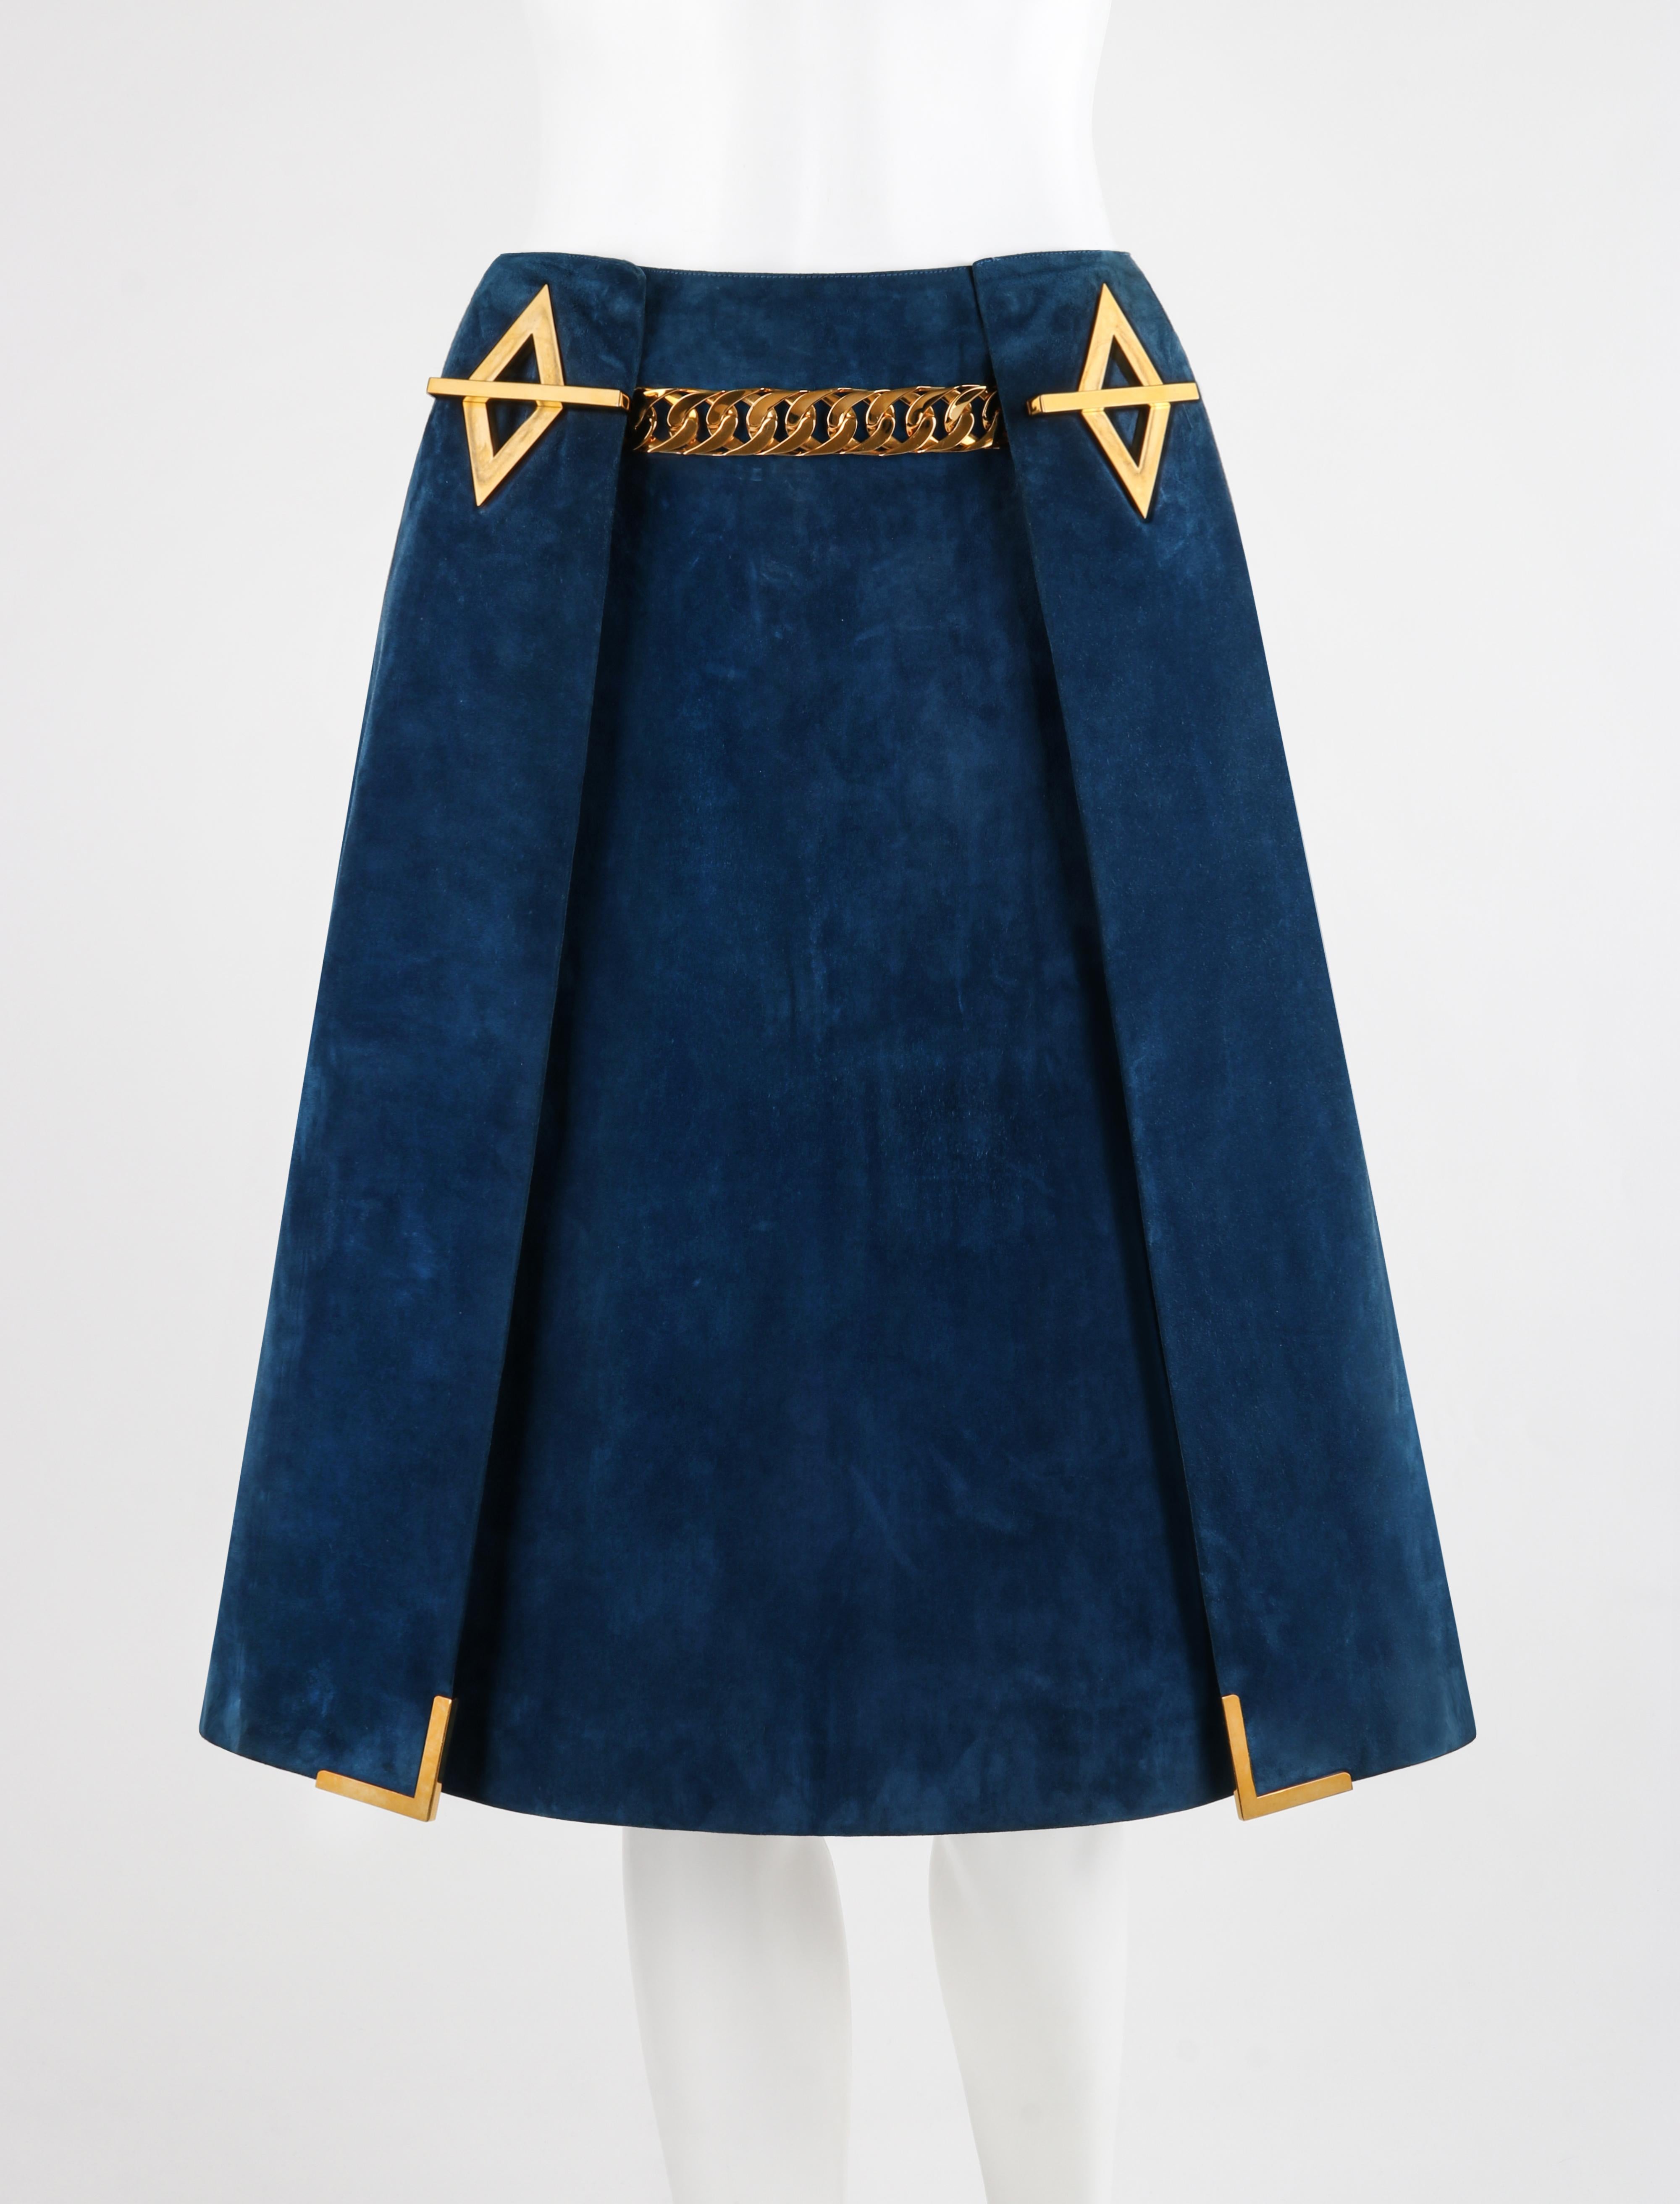 GUCCI c.1970's Dark Blue Suede Gold Chain Belt Pleated A-Line Knee Length Skirt RARE

Brand / Manufacturer: Gucci
Circa: 1970's
Style: A Line Skirt
Color(s): Blue, Gold
Lined: Yes
Unmarked Fabric (feel of): Suede (exterior), Acetate